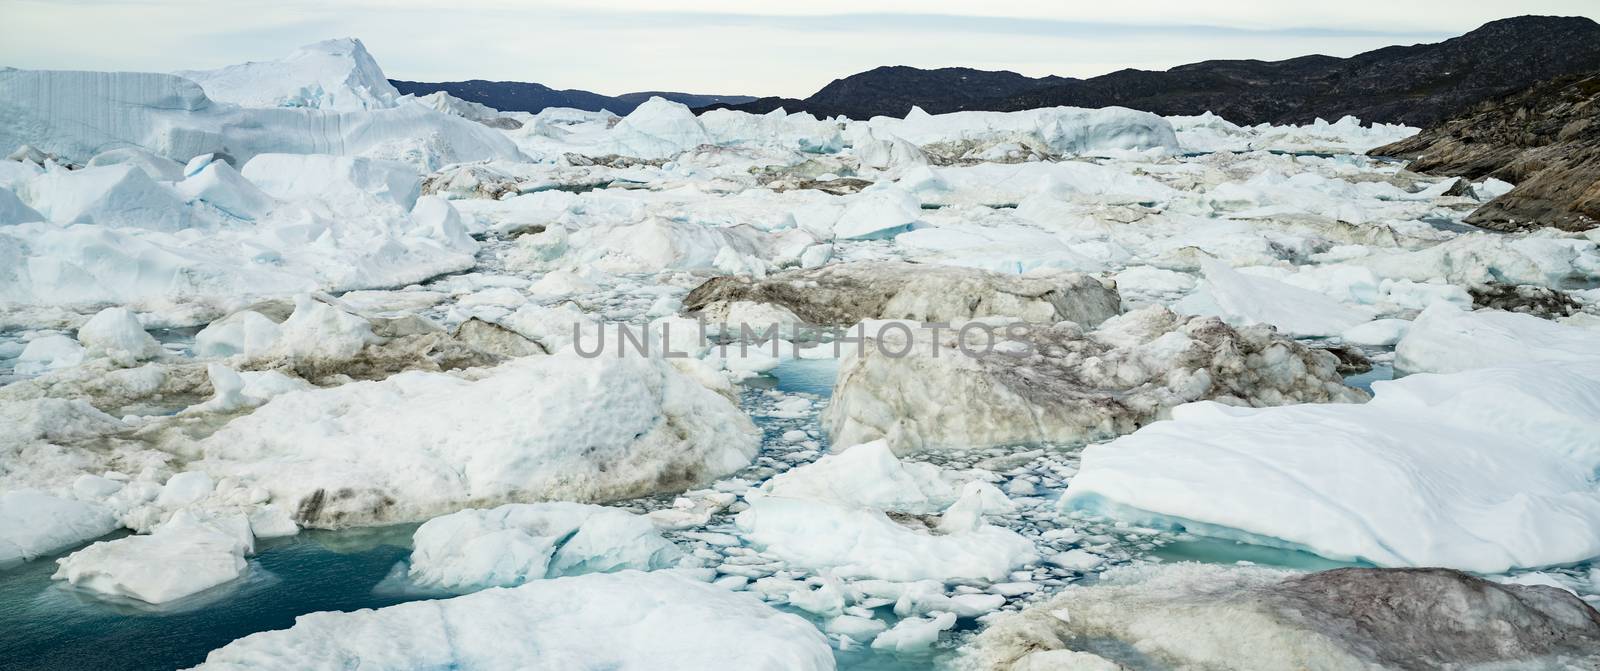 Climate Change and Global Warming - Icebergs and from melting glacier in icefjord in Ilulissat, Greenland. Panoramic banner photo of arctic nature ice landscape by Maridav